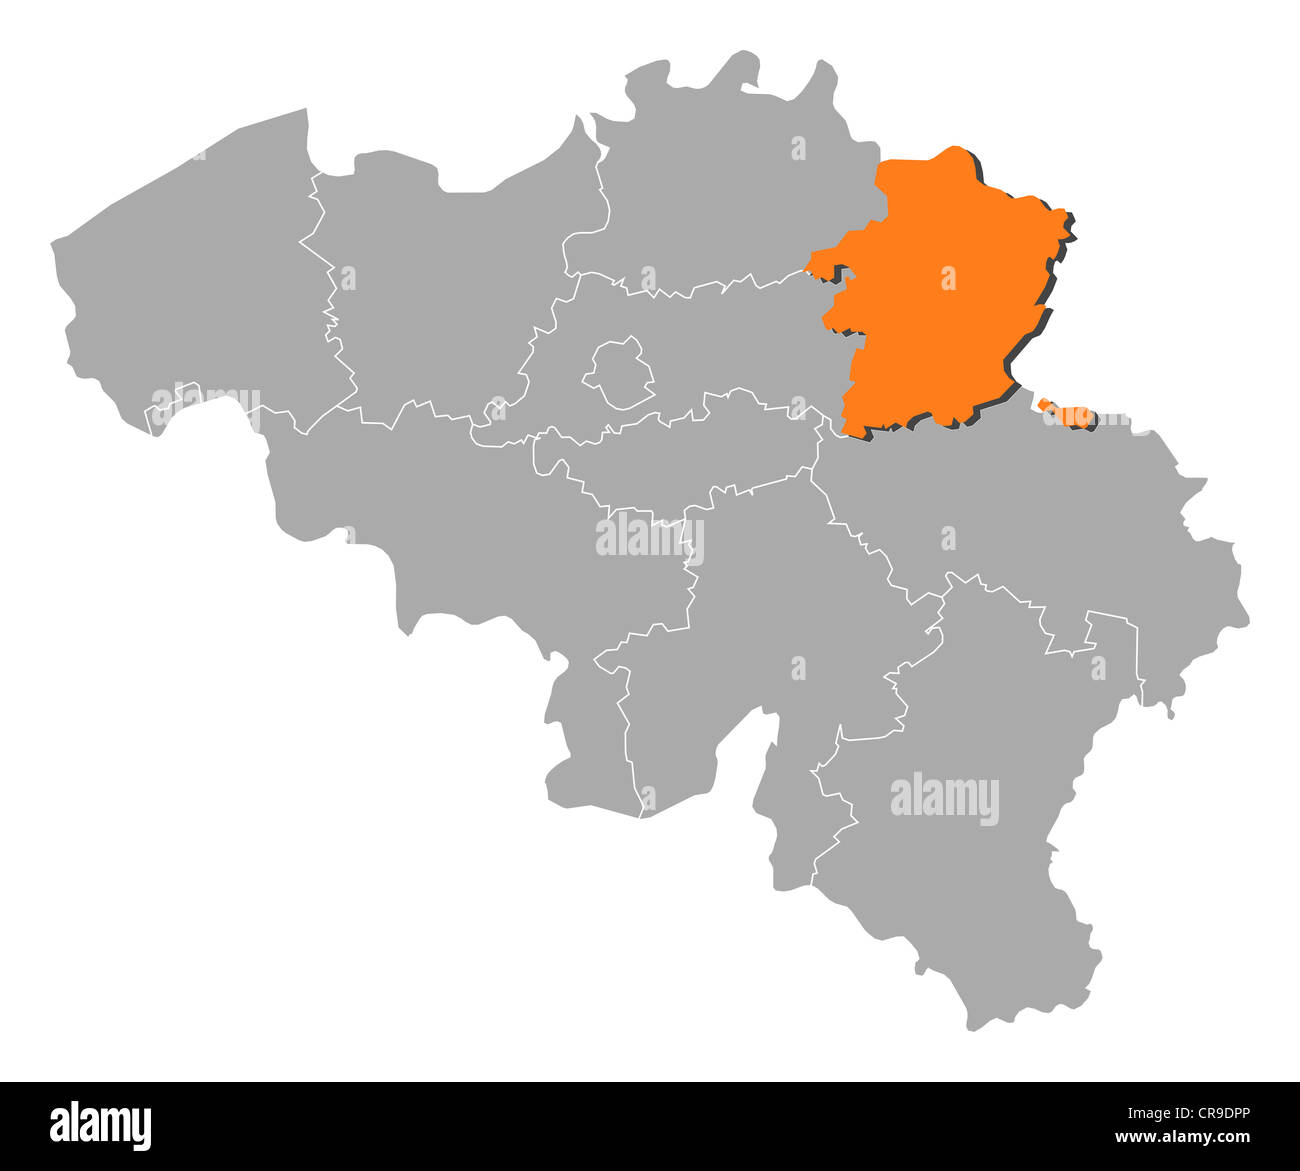 Political map of Belgium with the several states where Limburg is highlighted. Stock Photo